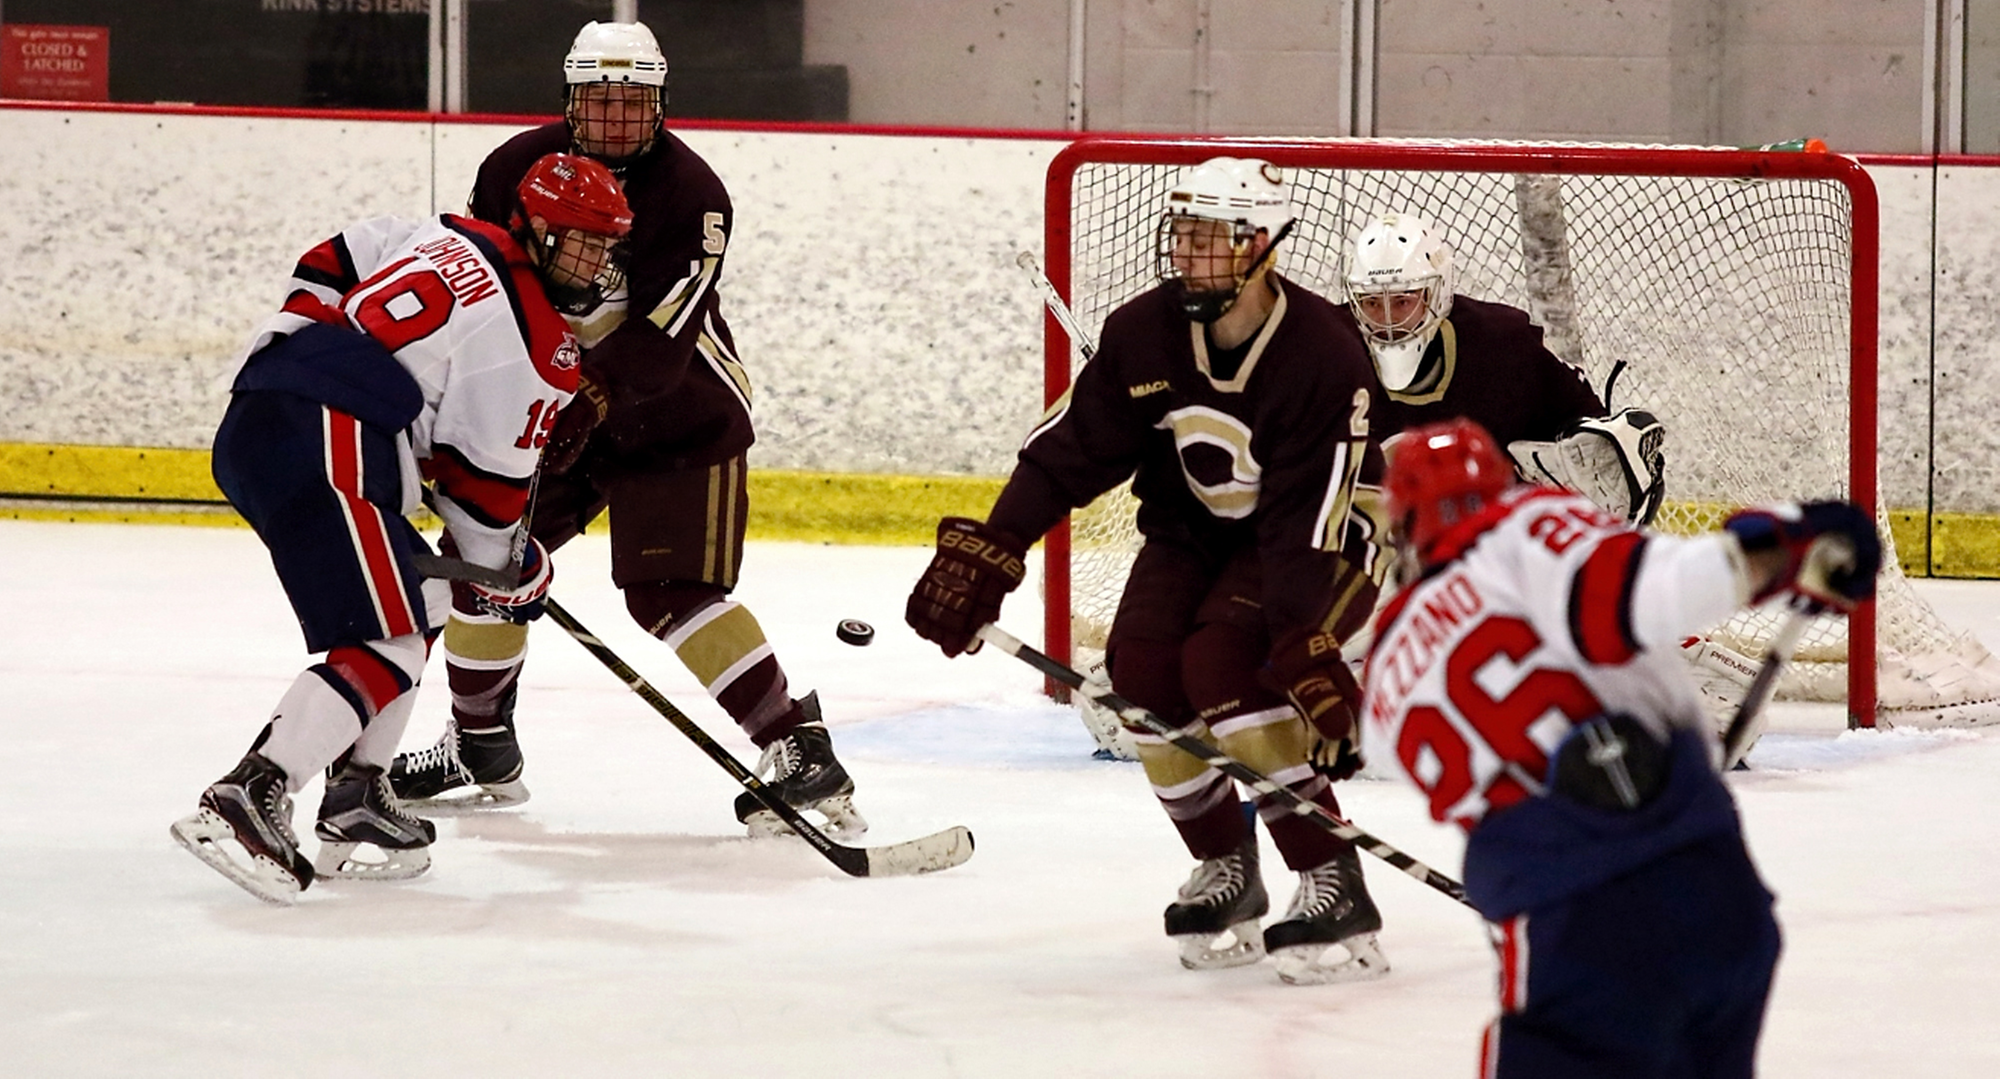 The Cobber defense shut down the St. Mary's power play and goalie Sam Nelson made 38 saves in the Cobbers' 3-2 win at St. Mary's. (Photo courtesy of Ryan Coleman, D3photography.com)